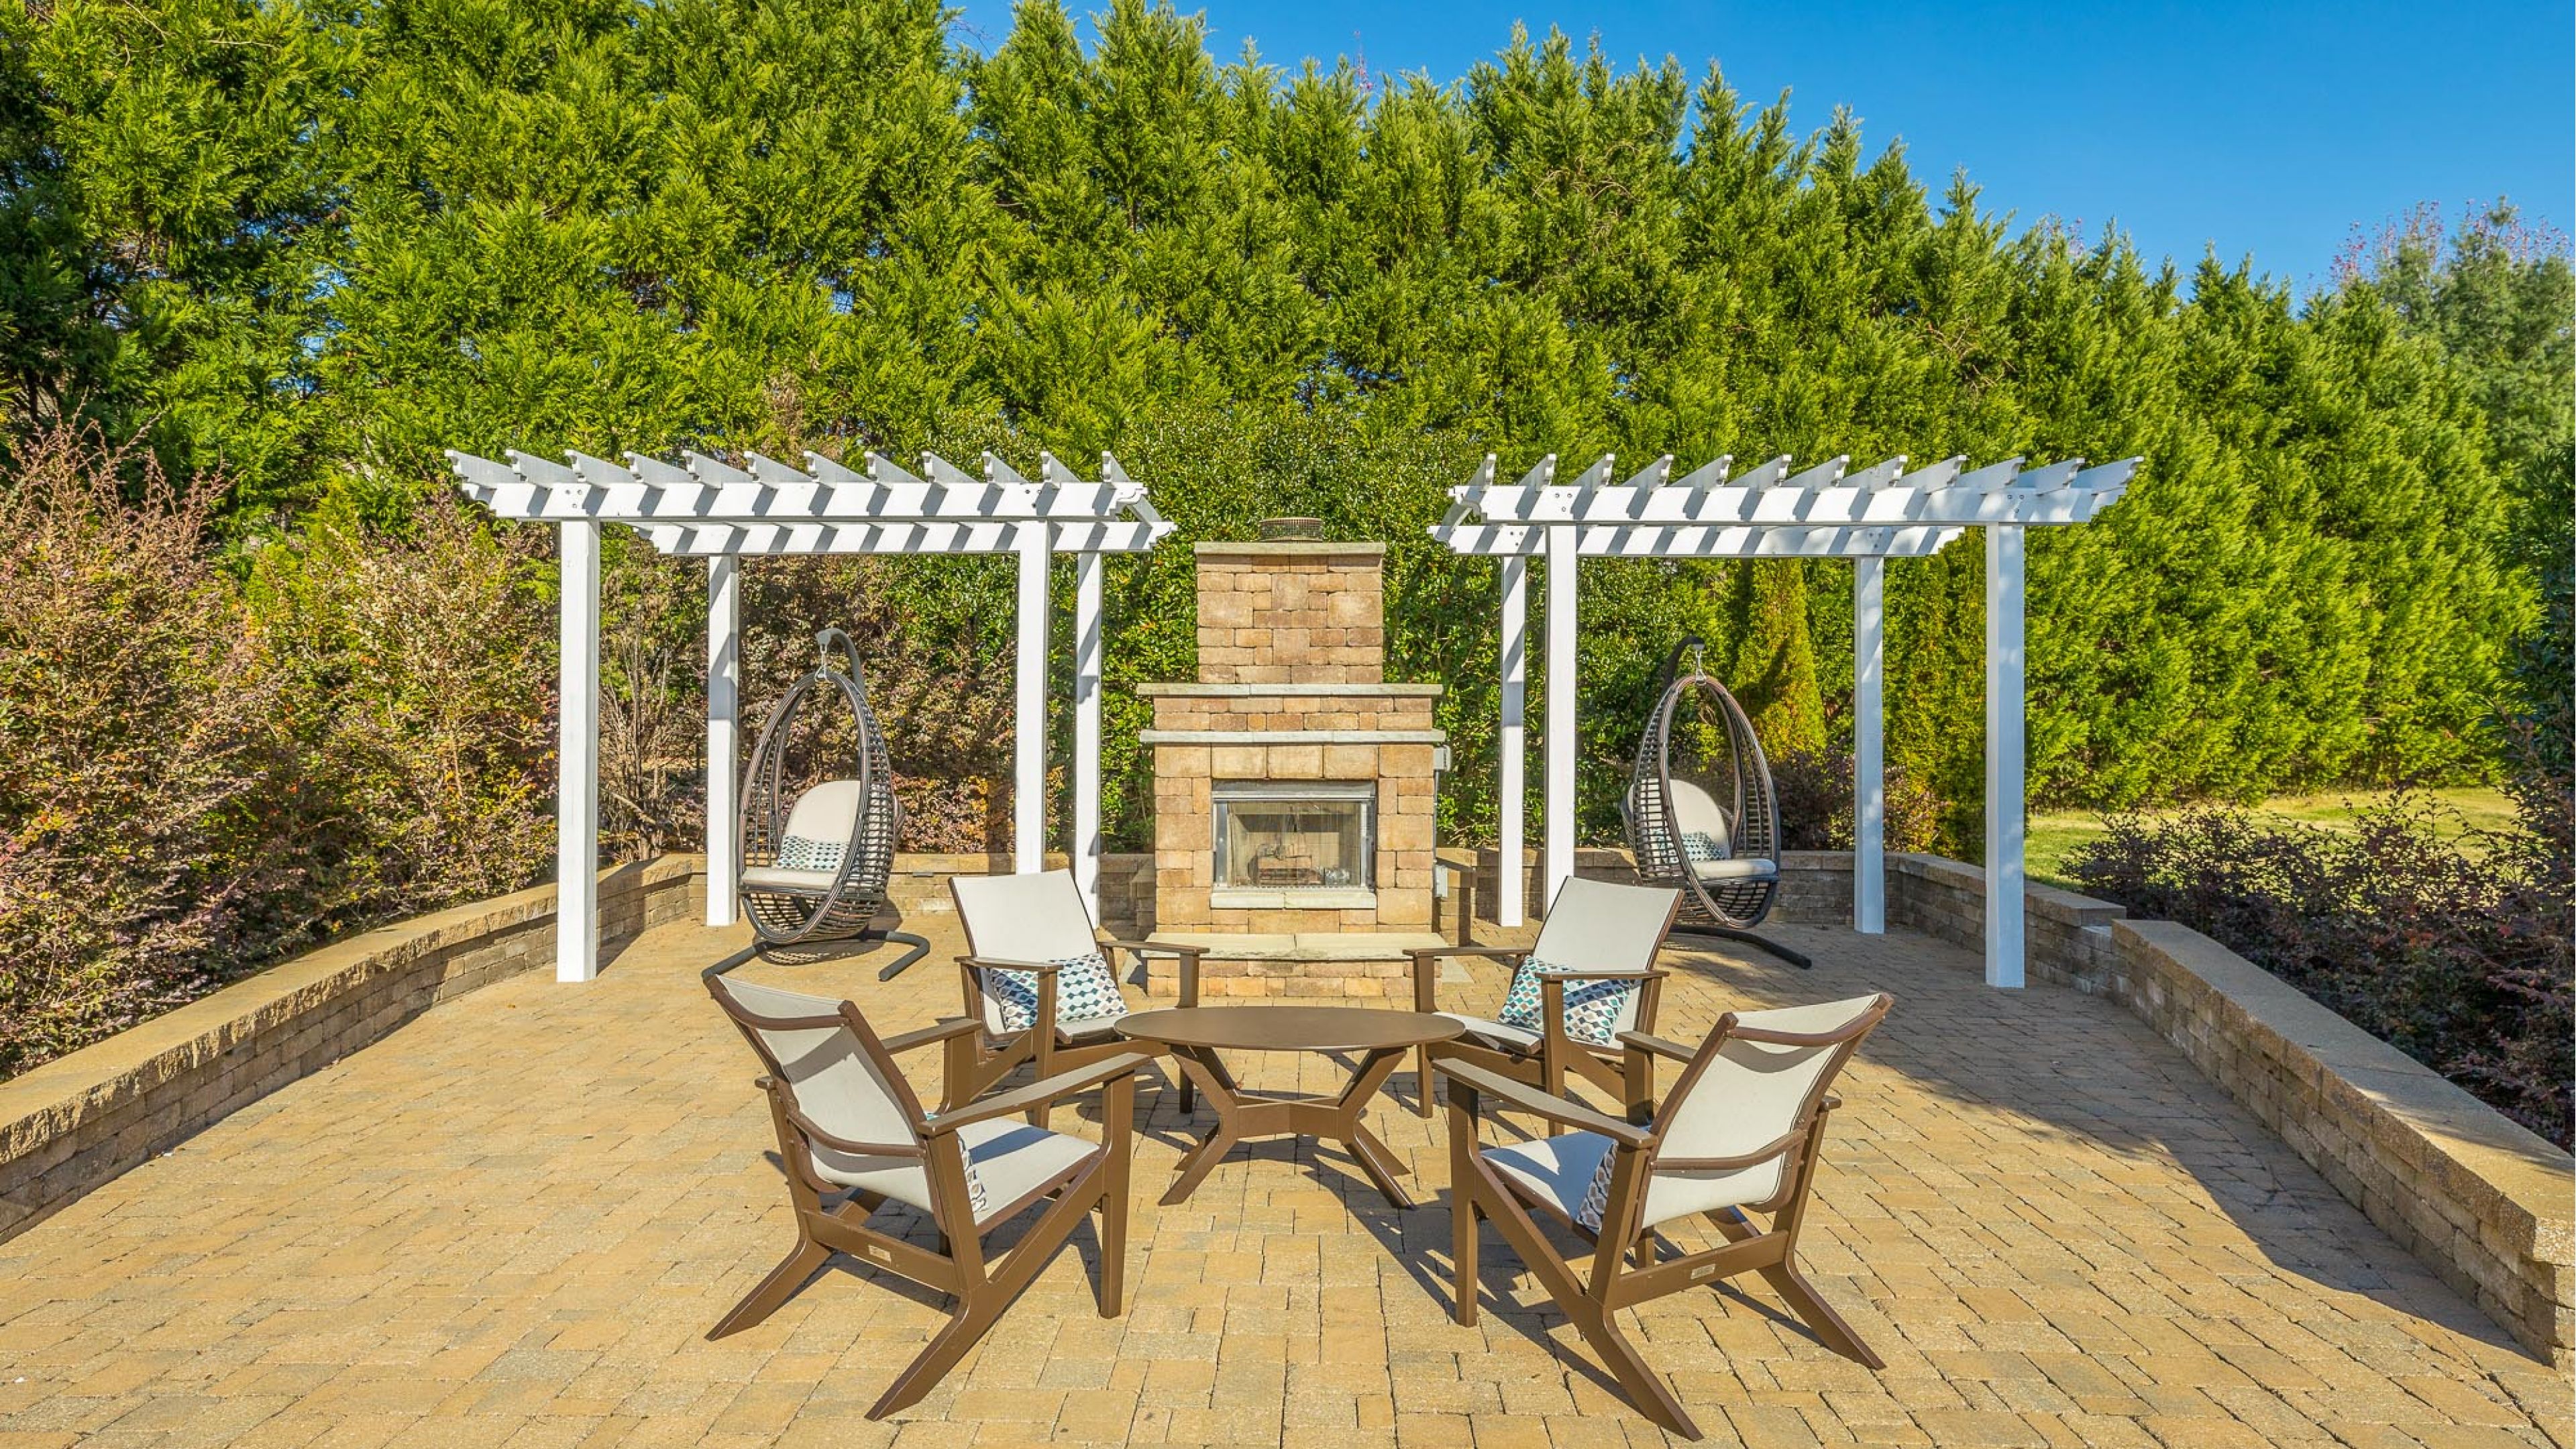 Hawthorne Park South outdoor patio with pergolas, hanging chairs, seating and fireplace